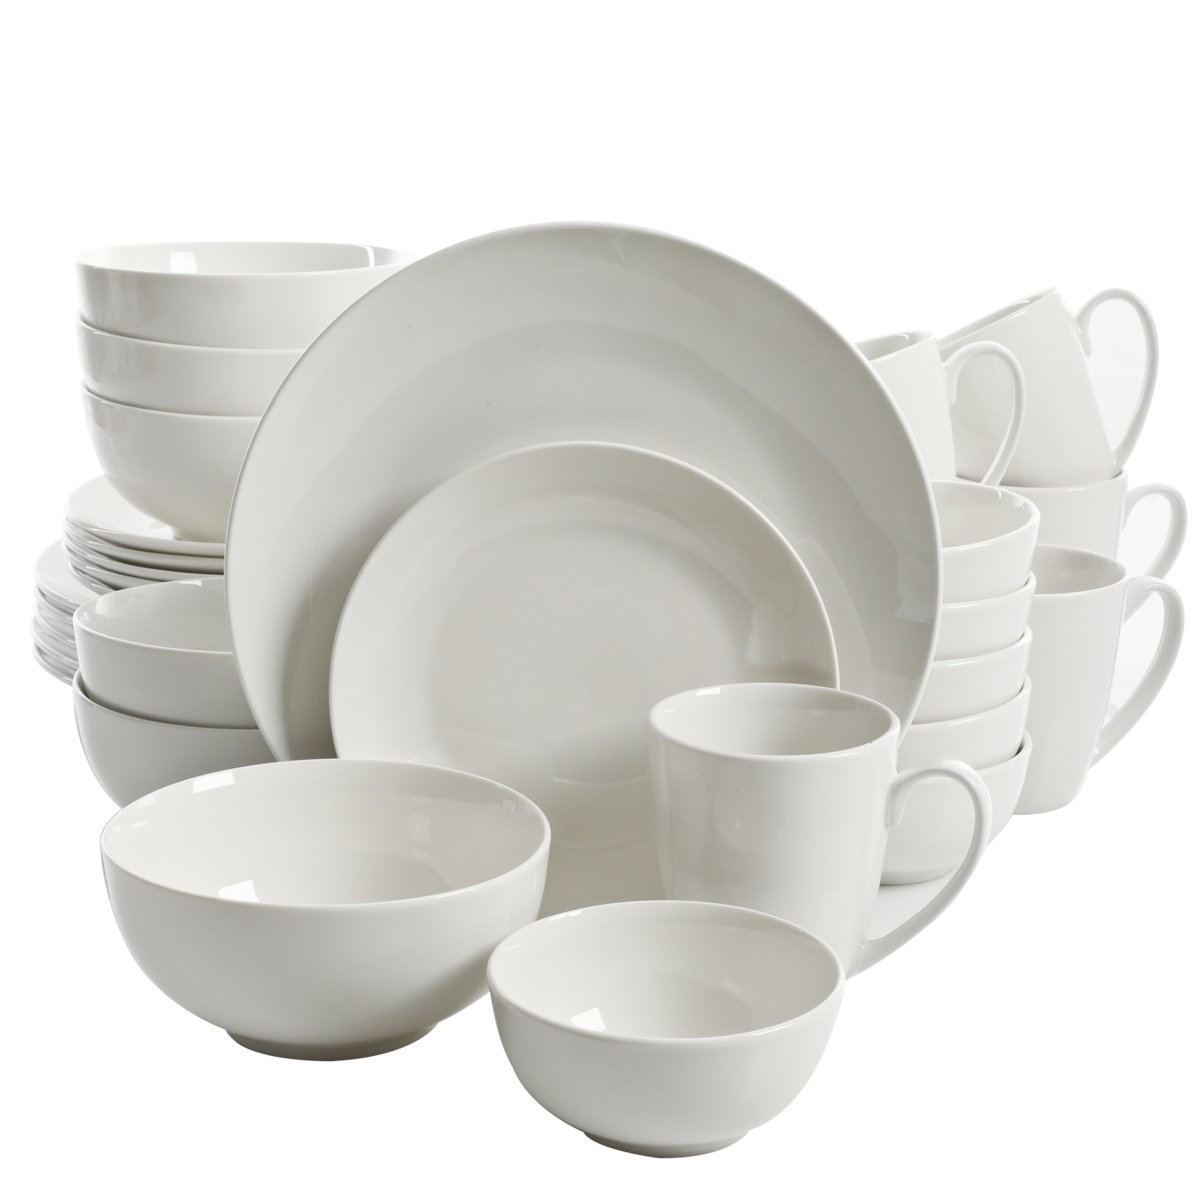 Picture of Gibson Home 105966.3 Ogalla Porcelain Dinnerware Set, White - 30 Piece